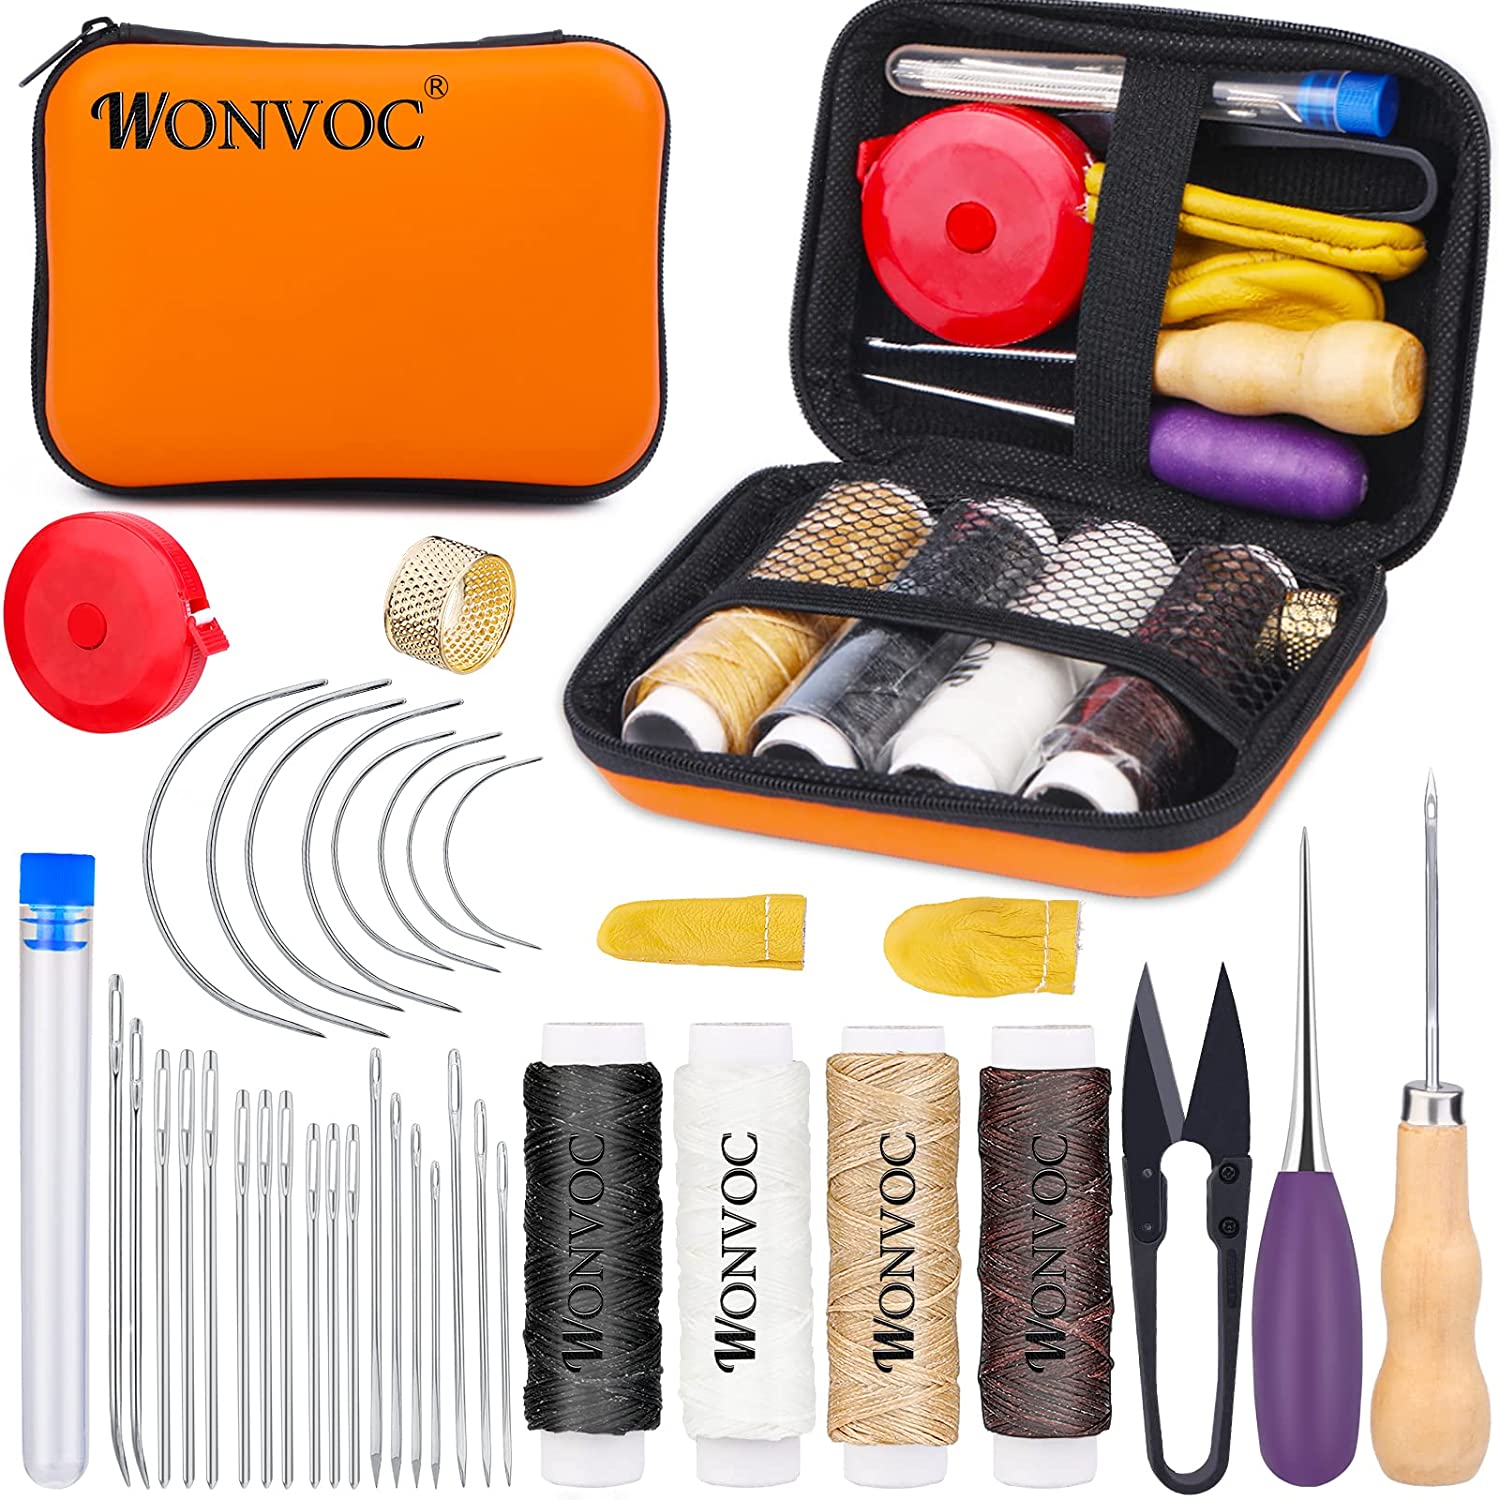 Leather Sewing Upholstery Repair Kit with Sewing Awl Seam Ripper Leather Hand Sewing Stitching Needles Sewing Thread Leather Craft Tool Kit for